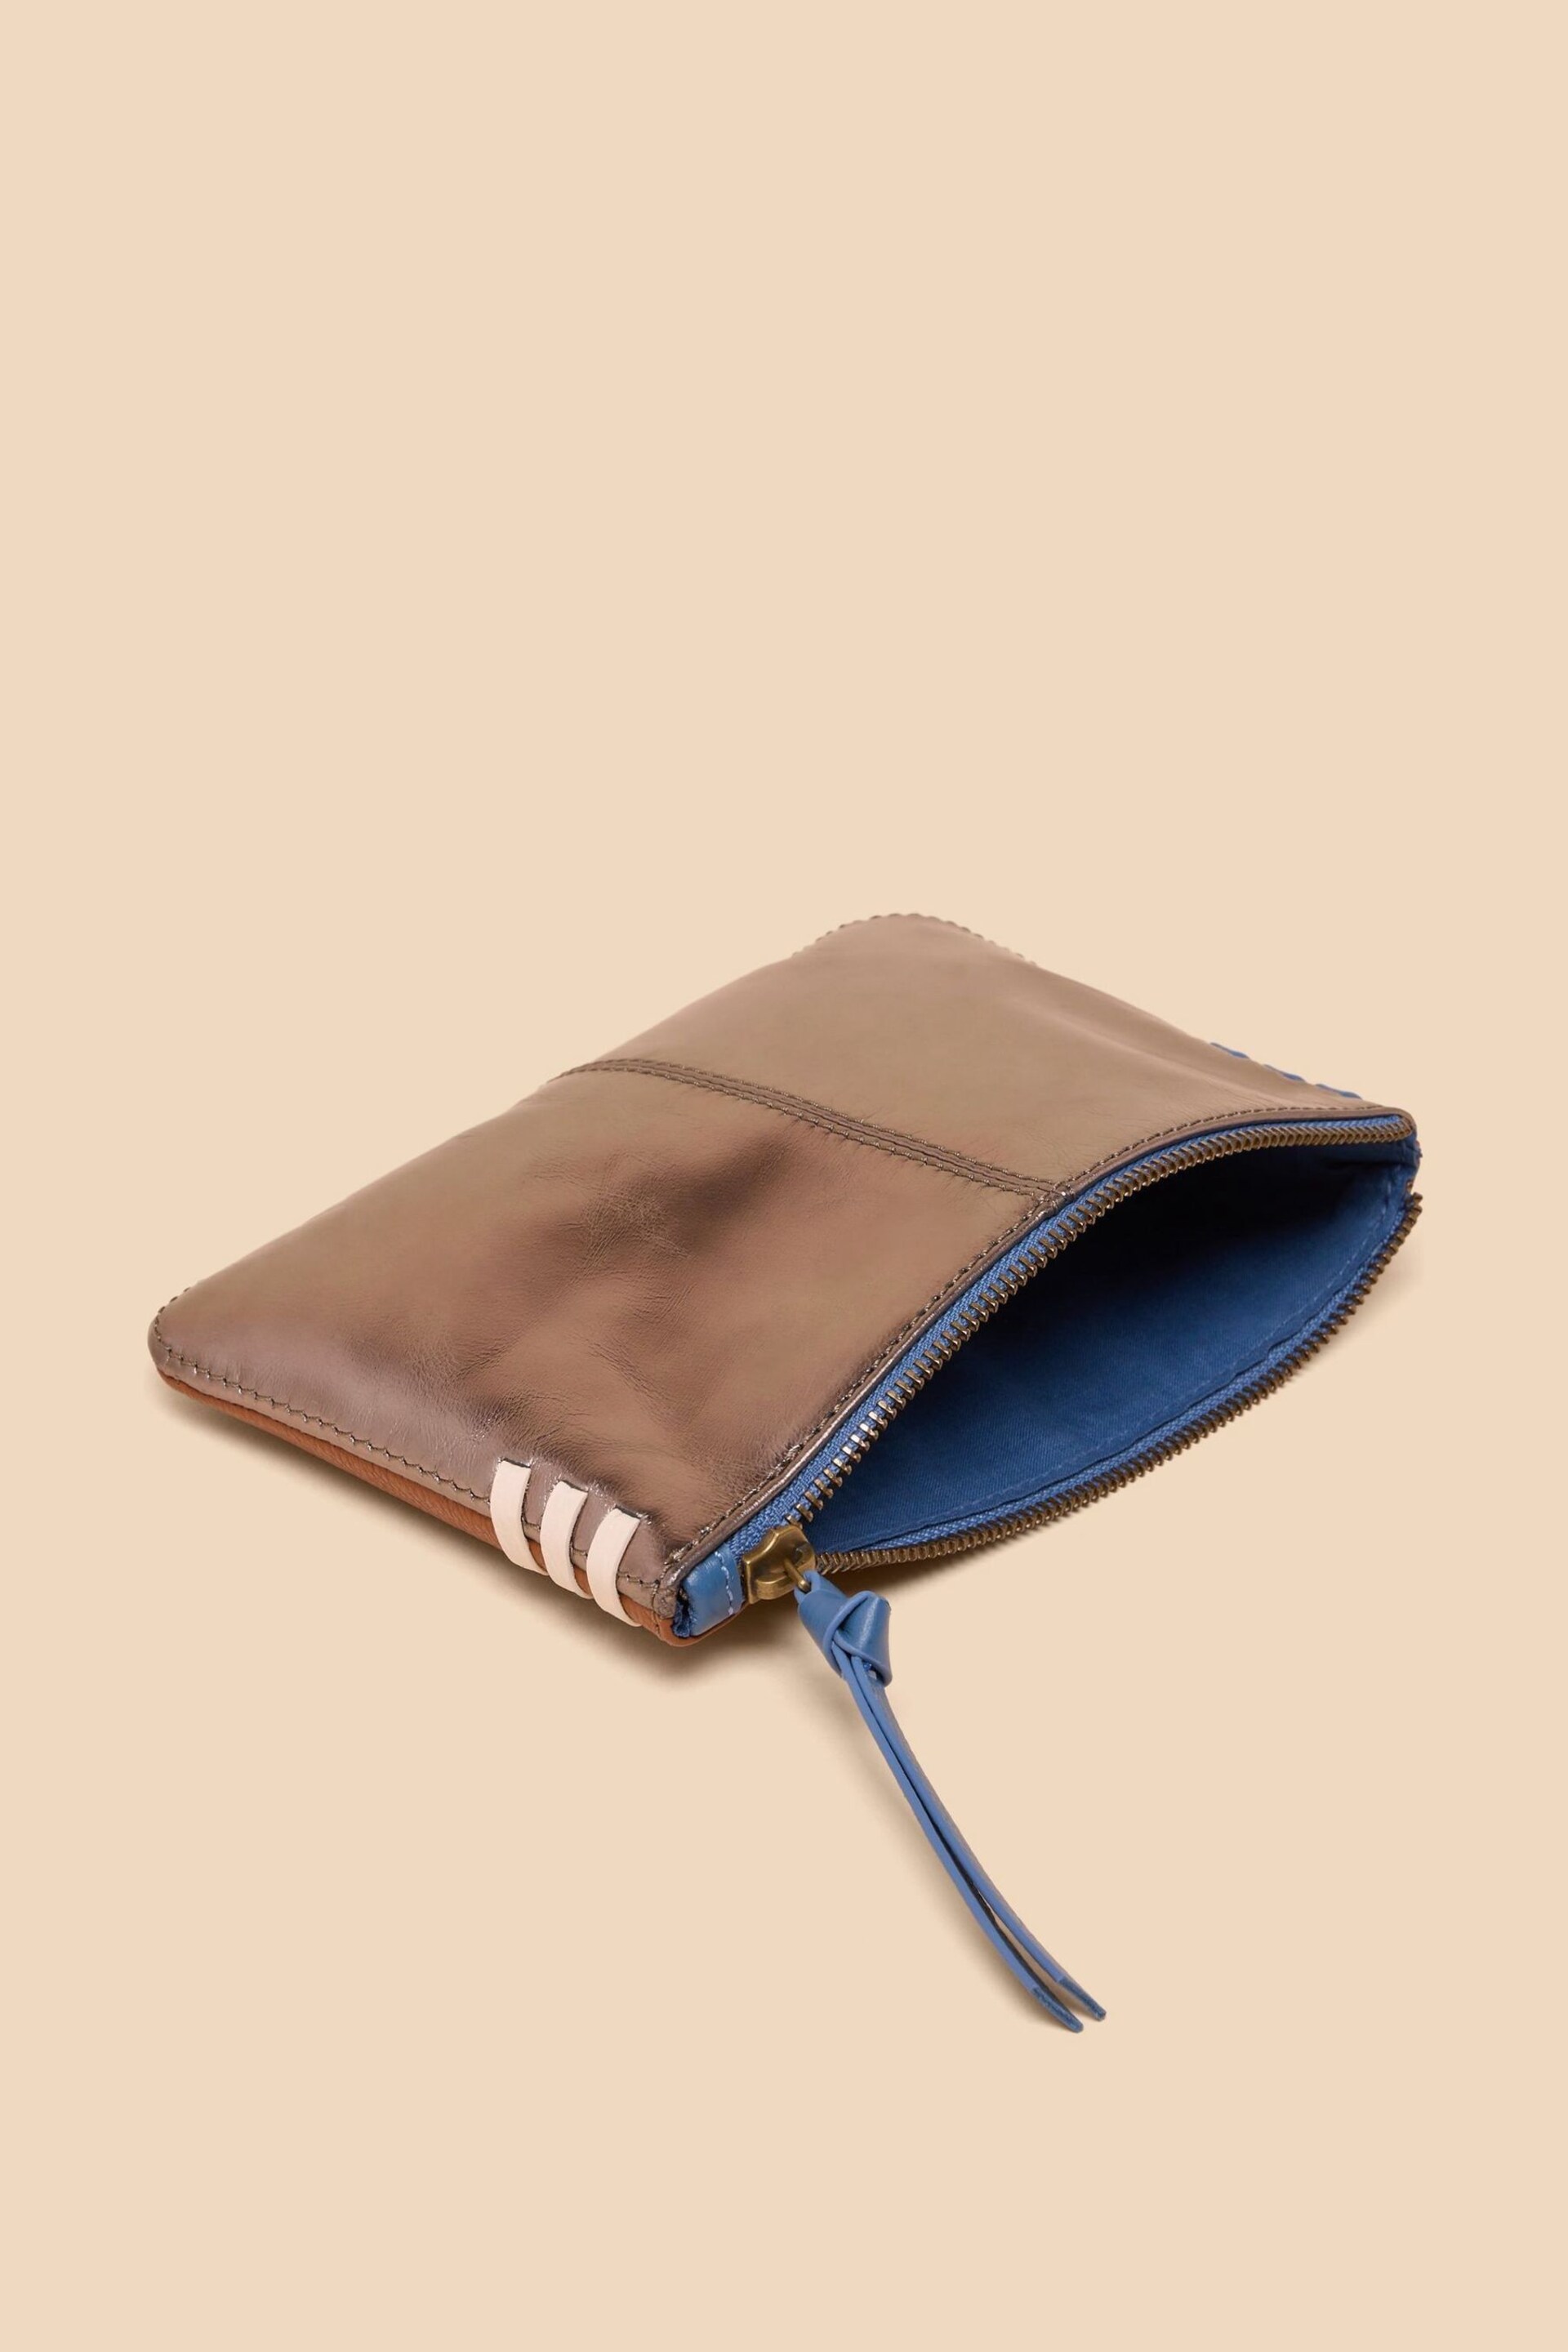 White Stuff Brown Leather Zip Top Pouch - Image 4 of 4